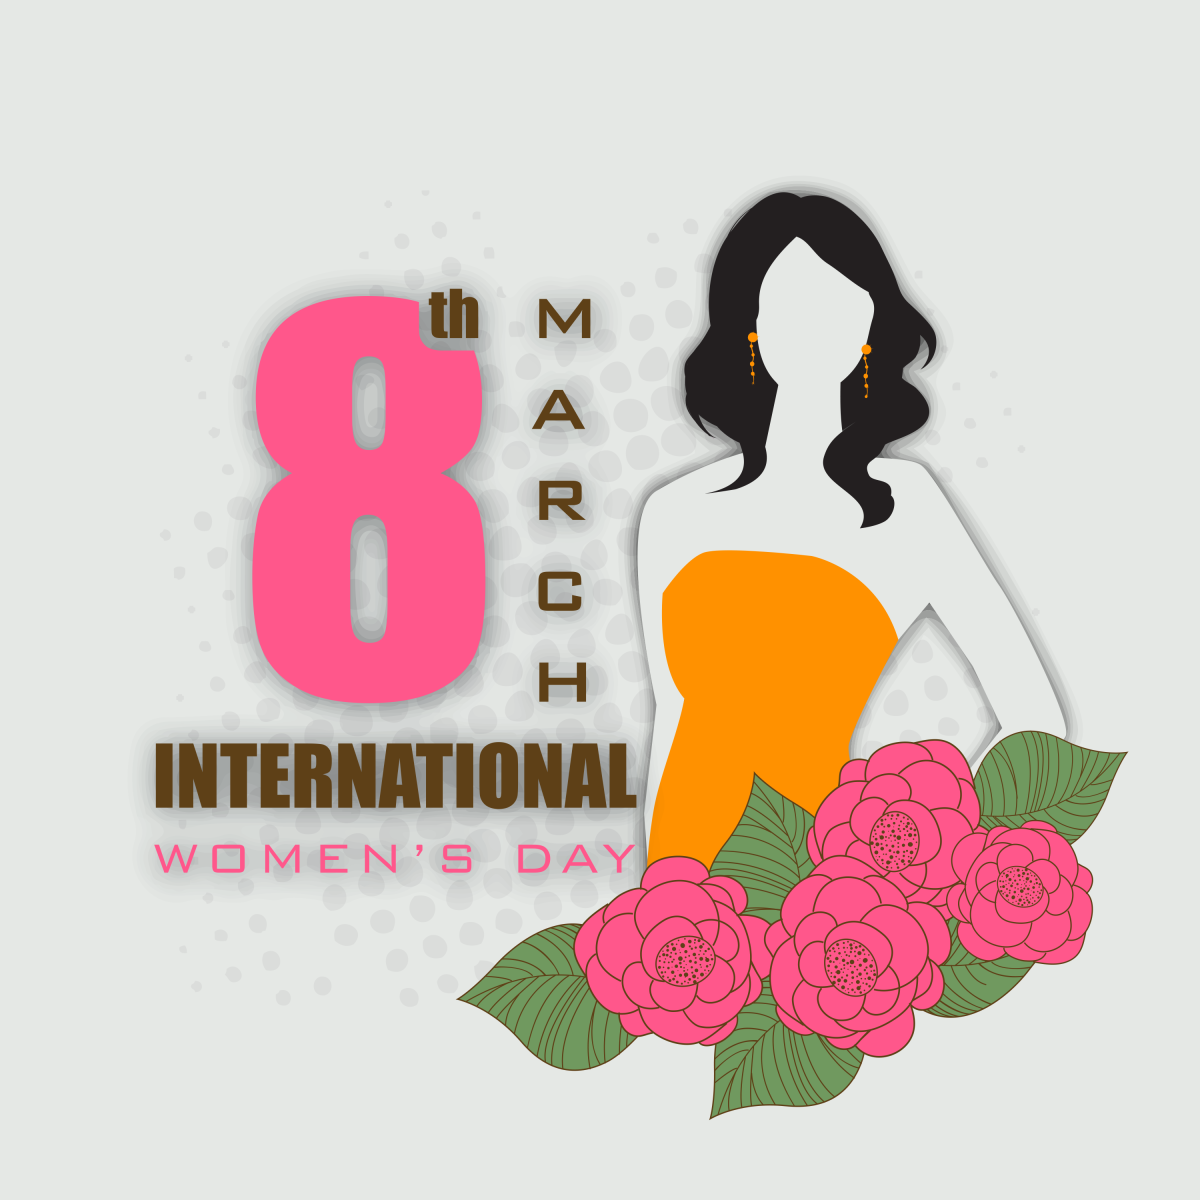 happy-womens-day-greeting-card-or-poster-design-with-stylish-text-8th-march_XJfoS7